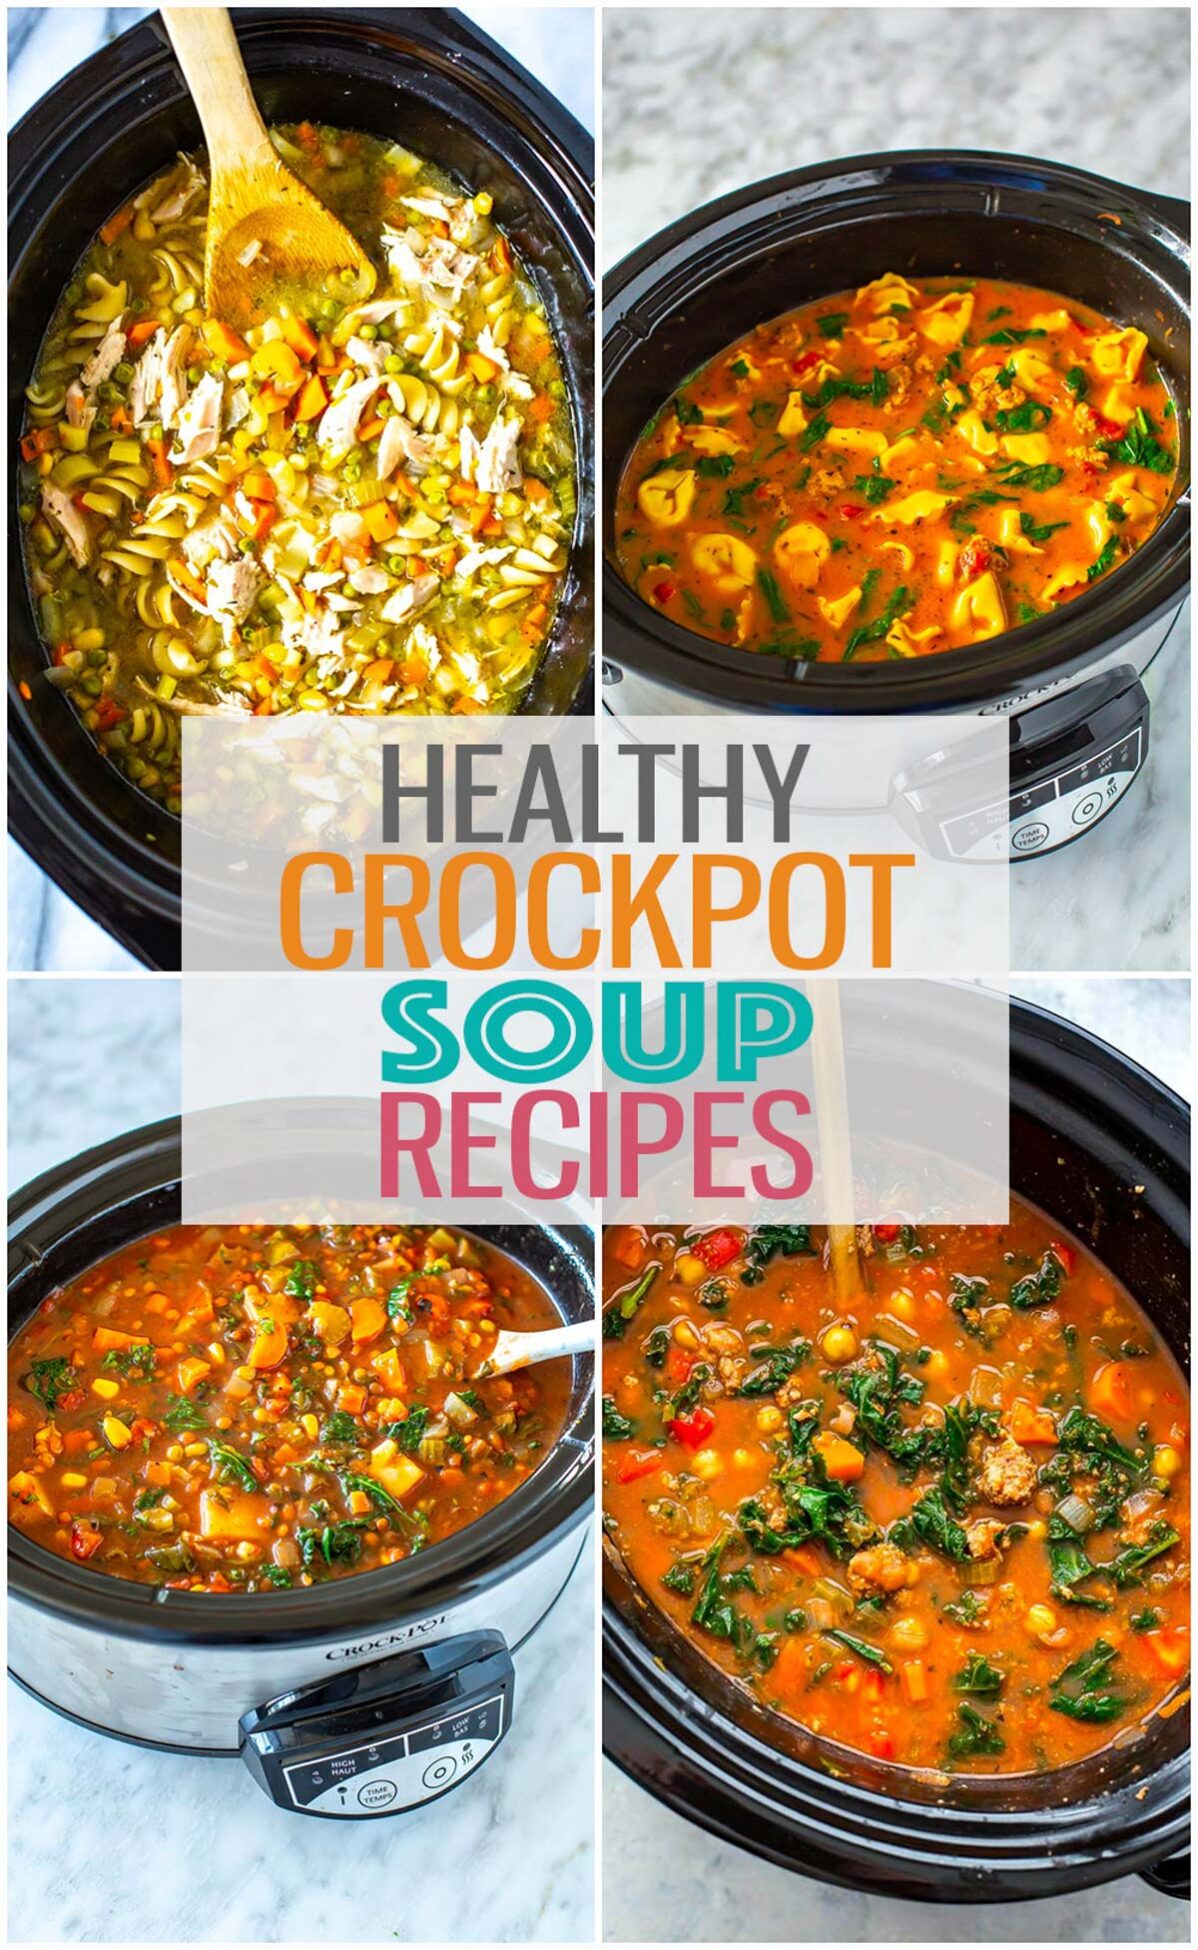 Four different slow cooker soups with the text "Healthy Crockpot Soup Recipes" layered over top.